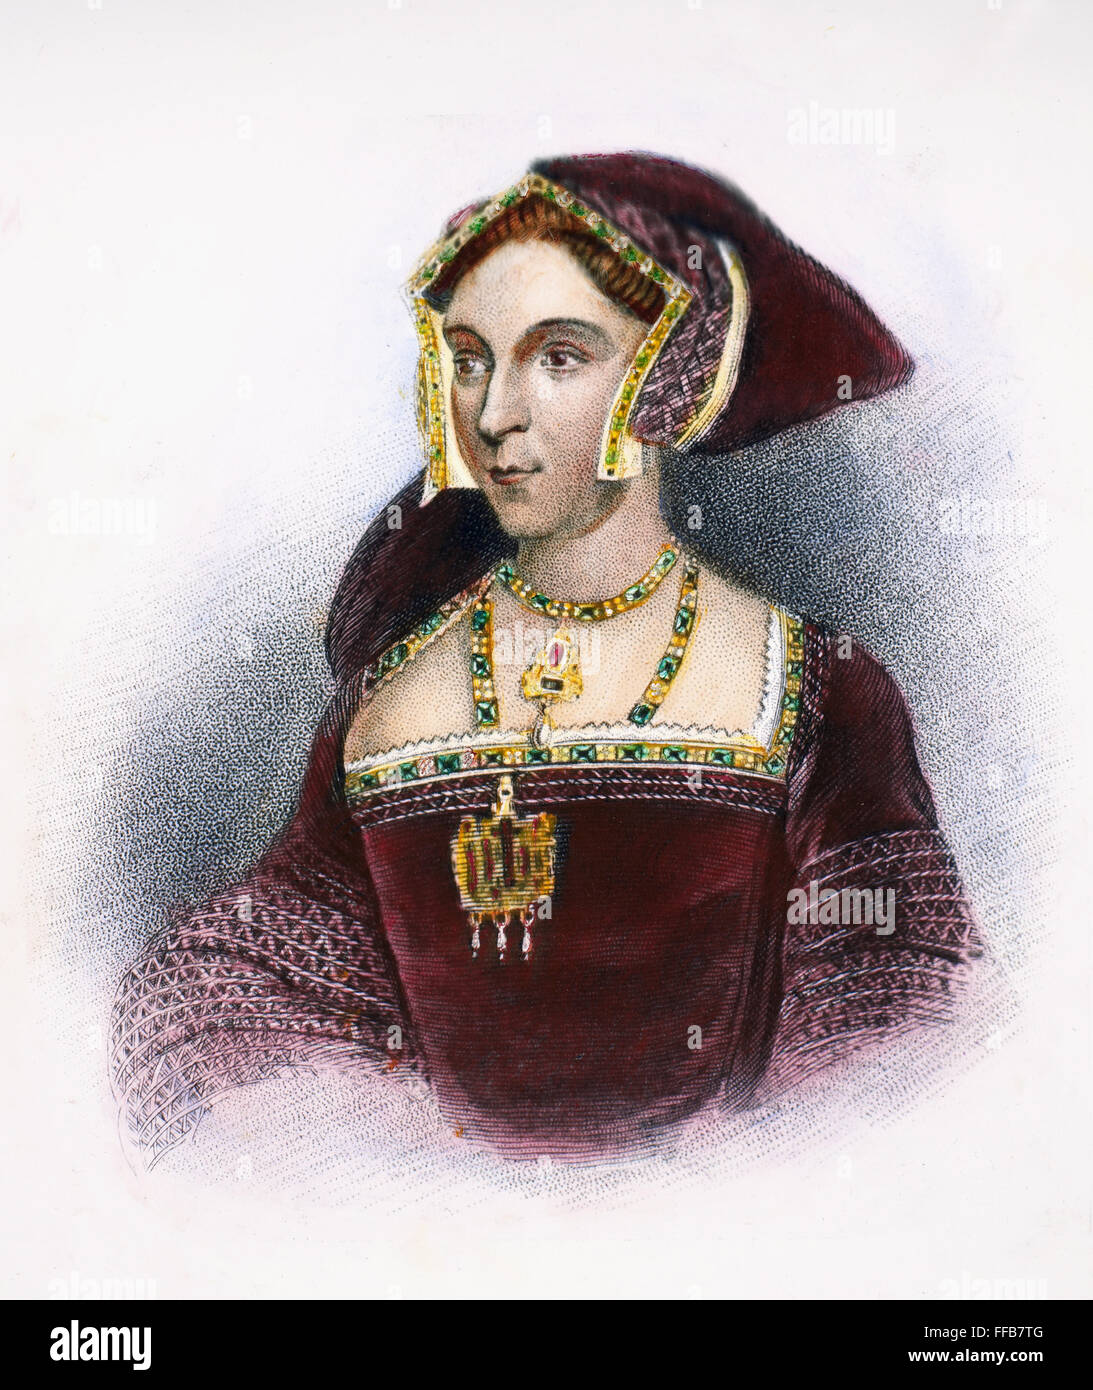 JANE SEYMOUR (1509-1537). /nThird wife of King Henry VIII of England. Line and stipple engraving, English, 1812, after a painting by Hans Holbein the Younger. Stock Photo